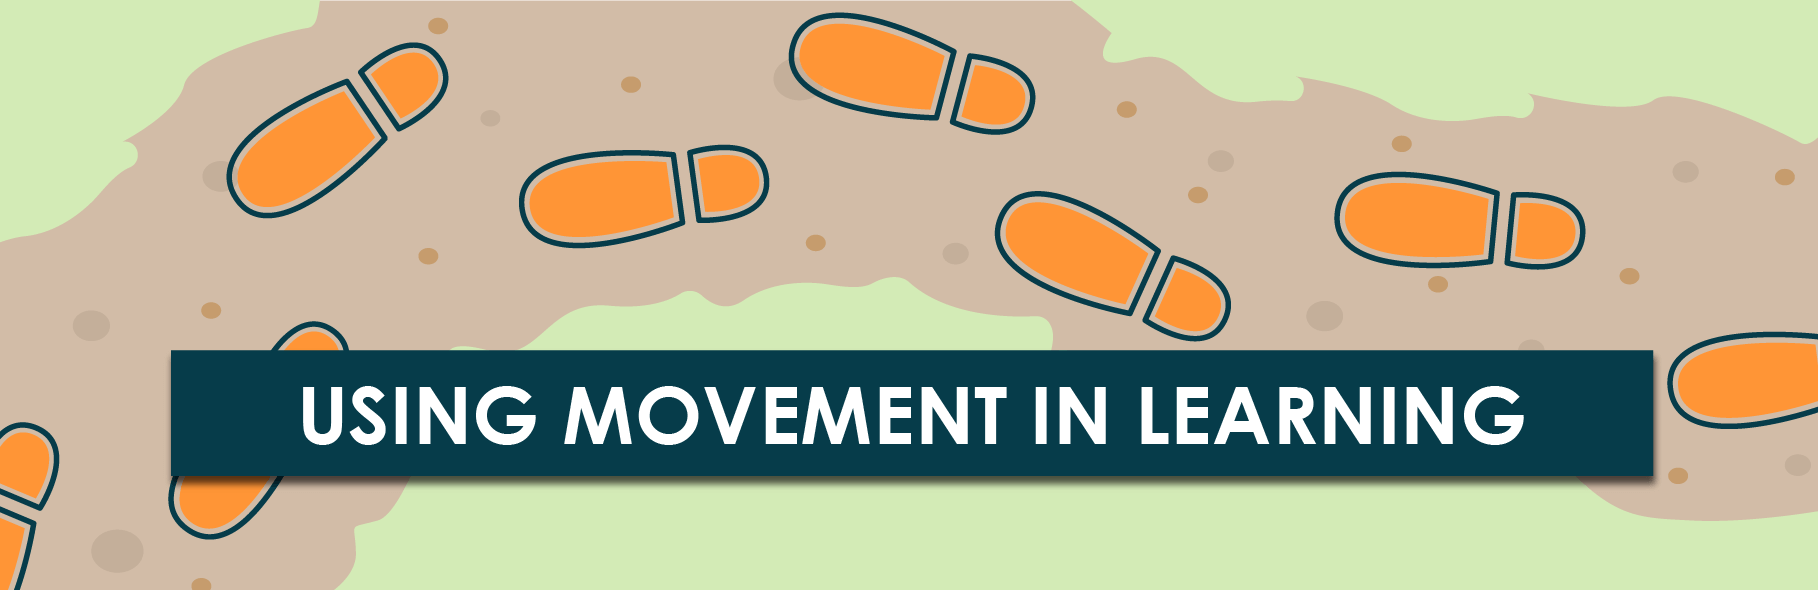 Using Movement in Learning